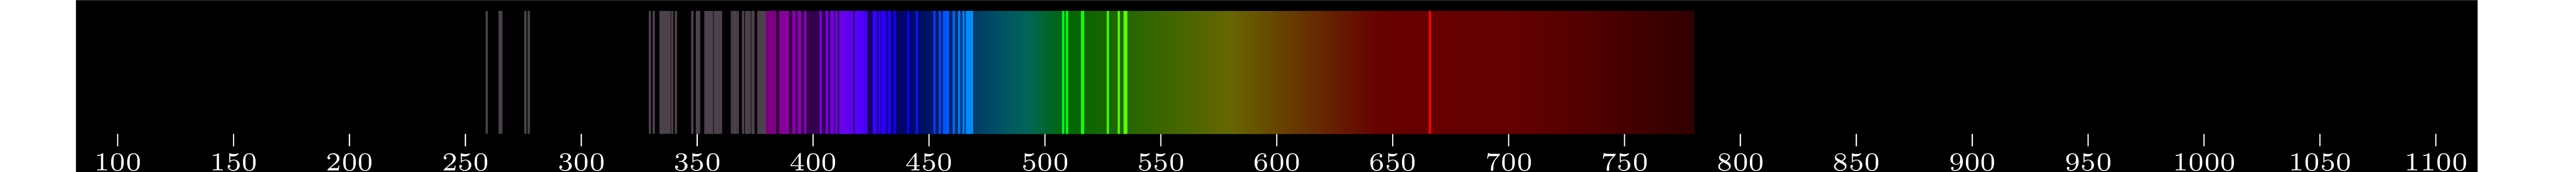 emmision spectra of element Nb